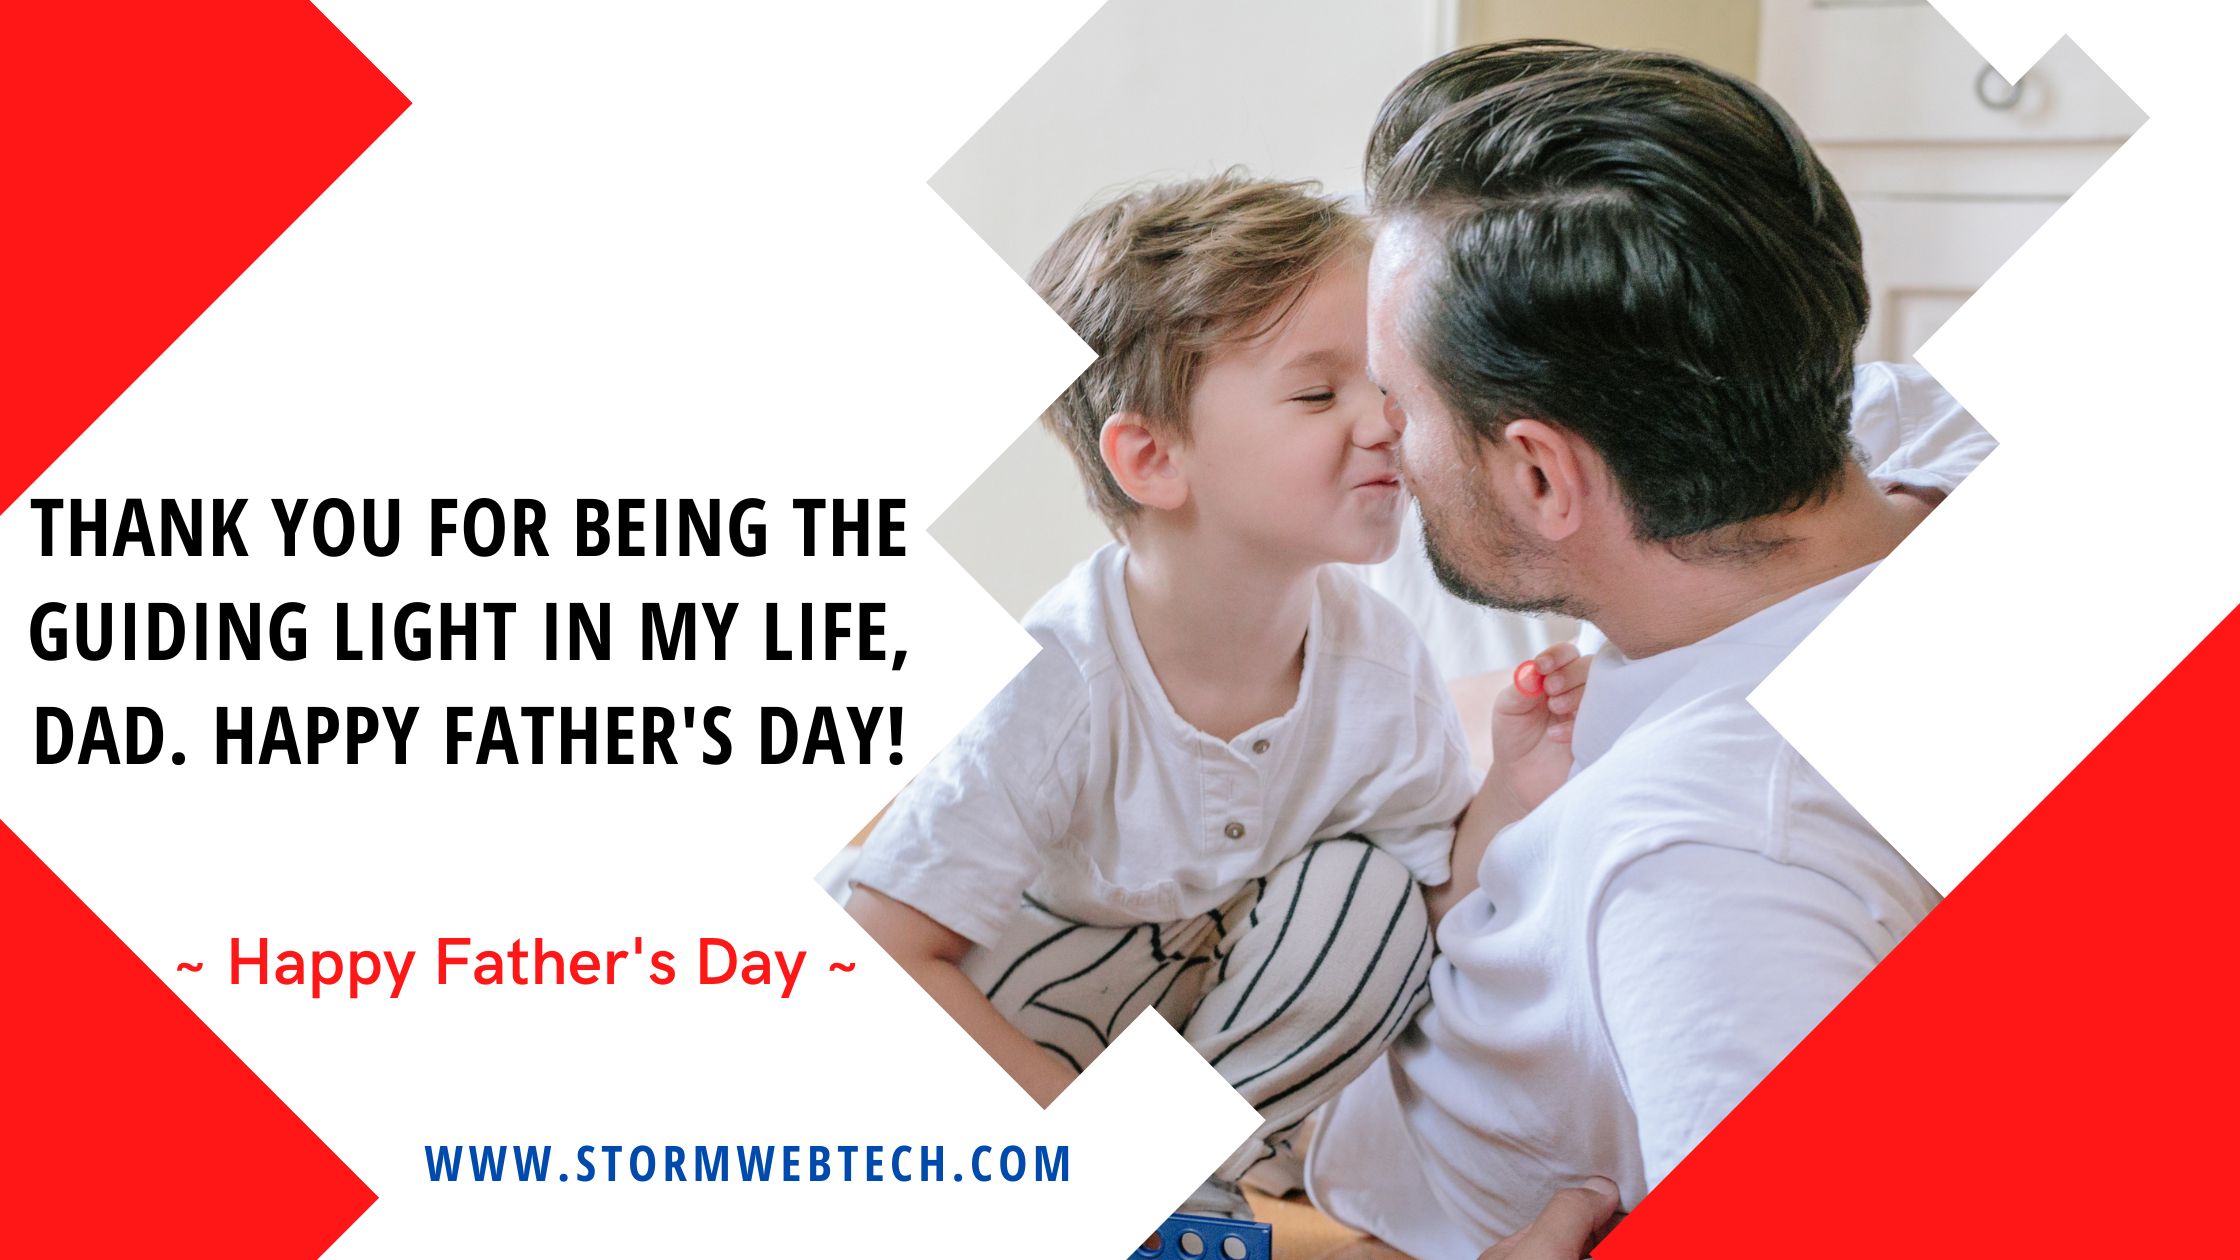 happy fathers day wishes on father's day 2023, happy fathers day messages on father’s day, father’s day 2023 wishes, father’s day 2023 messages